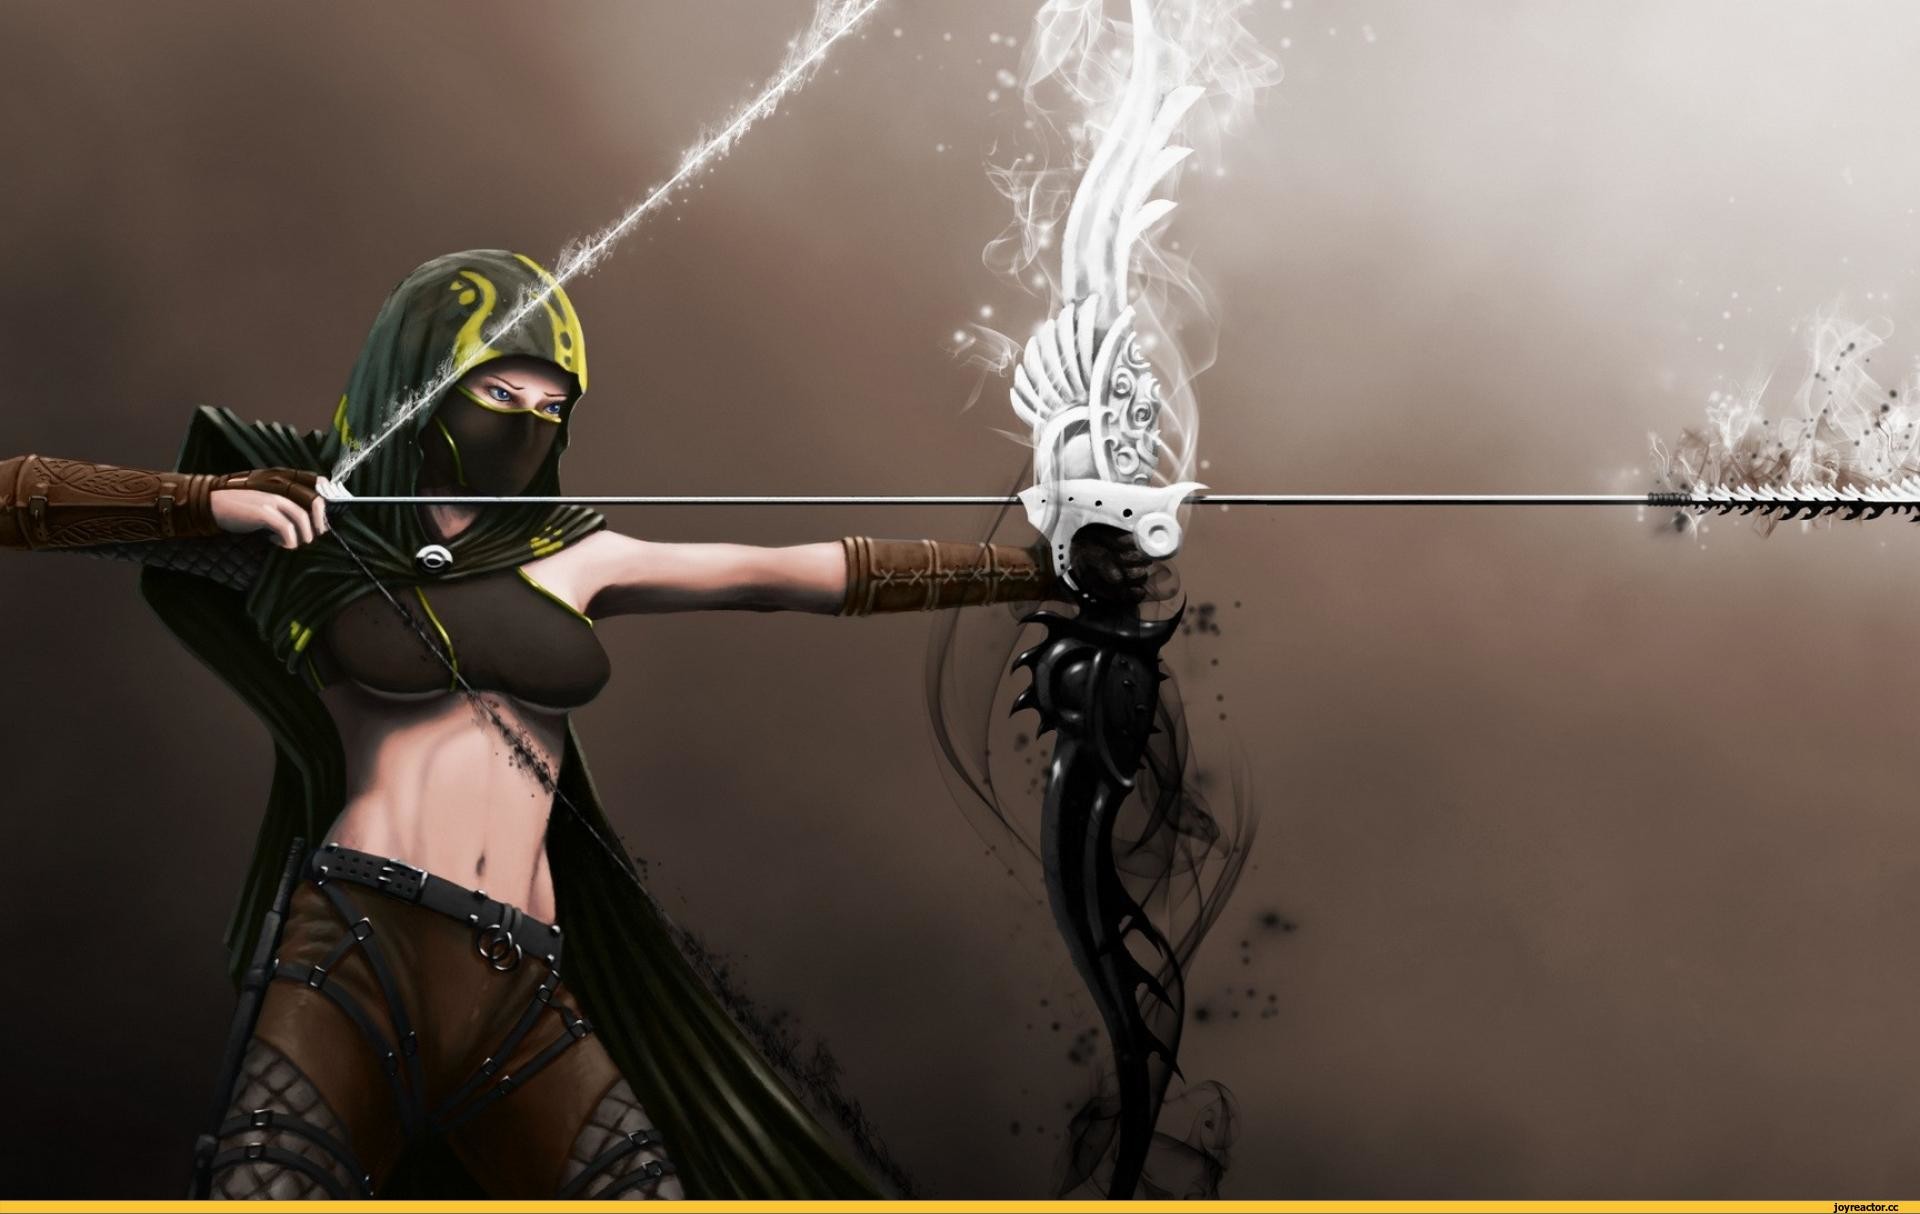 bow and arrow wallpaper,cg artwork,digital compositing,fictional character,pc game,personal protective equipment